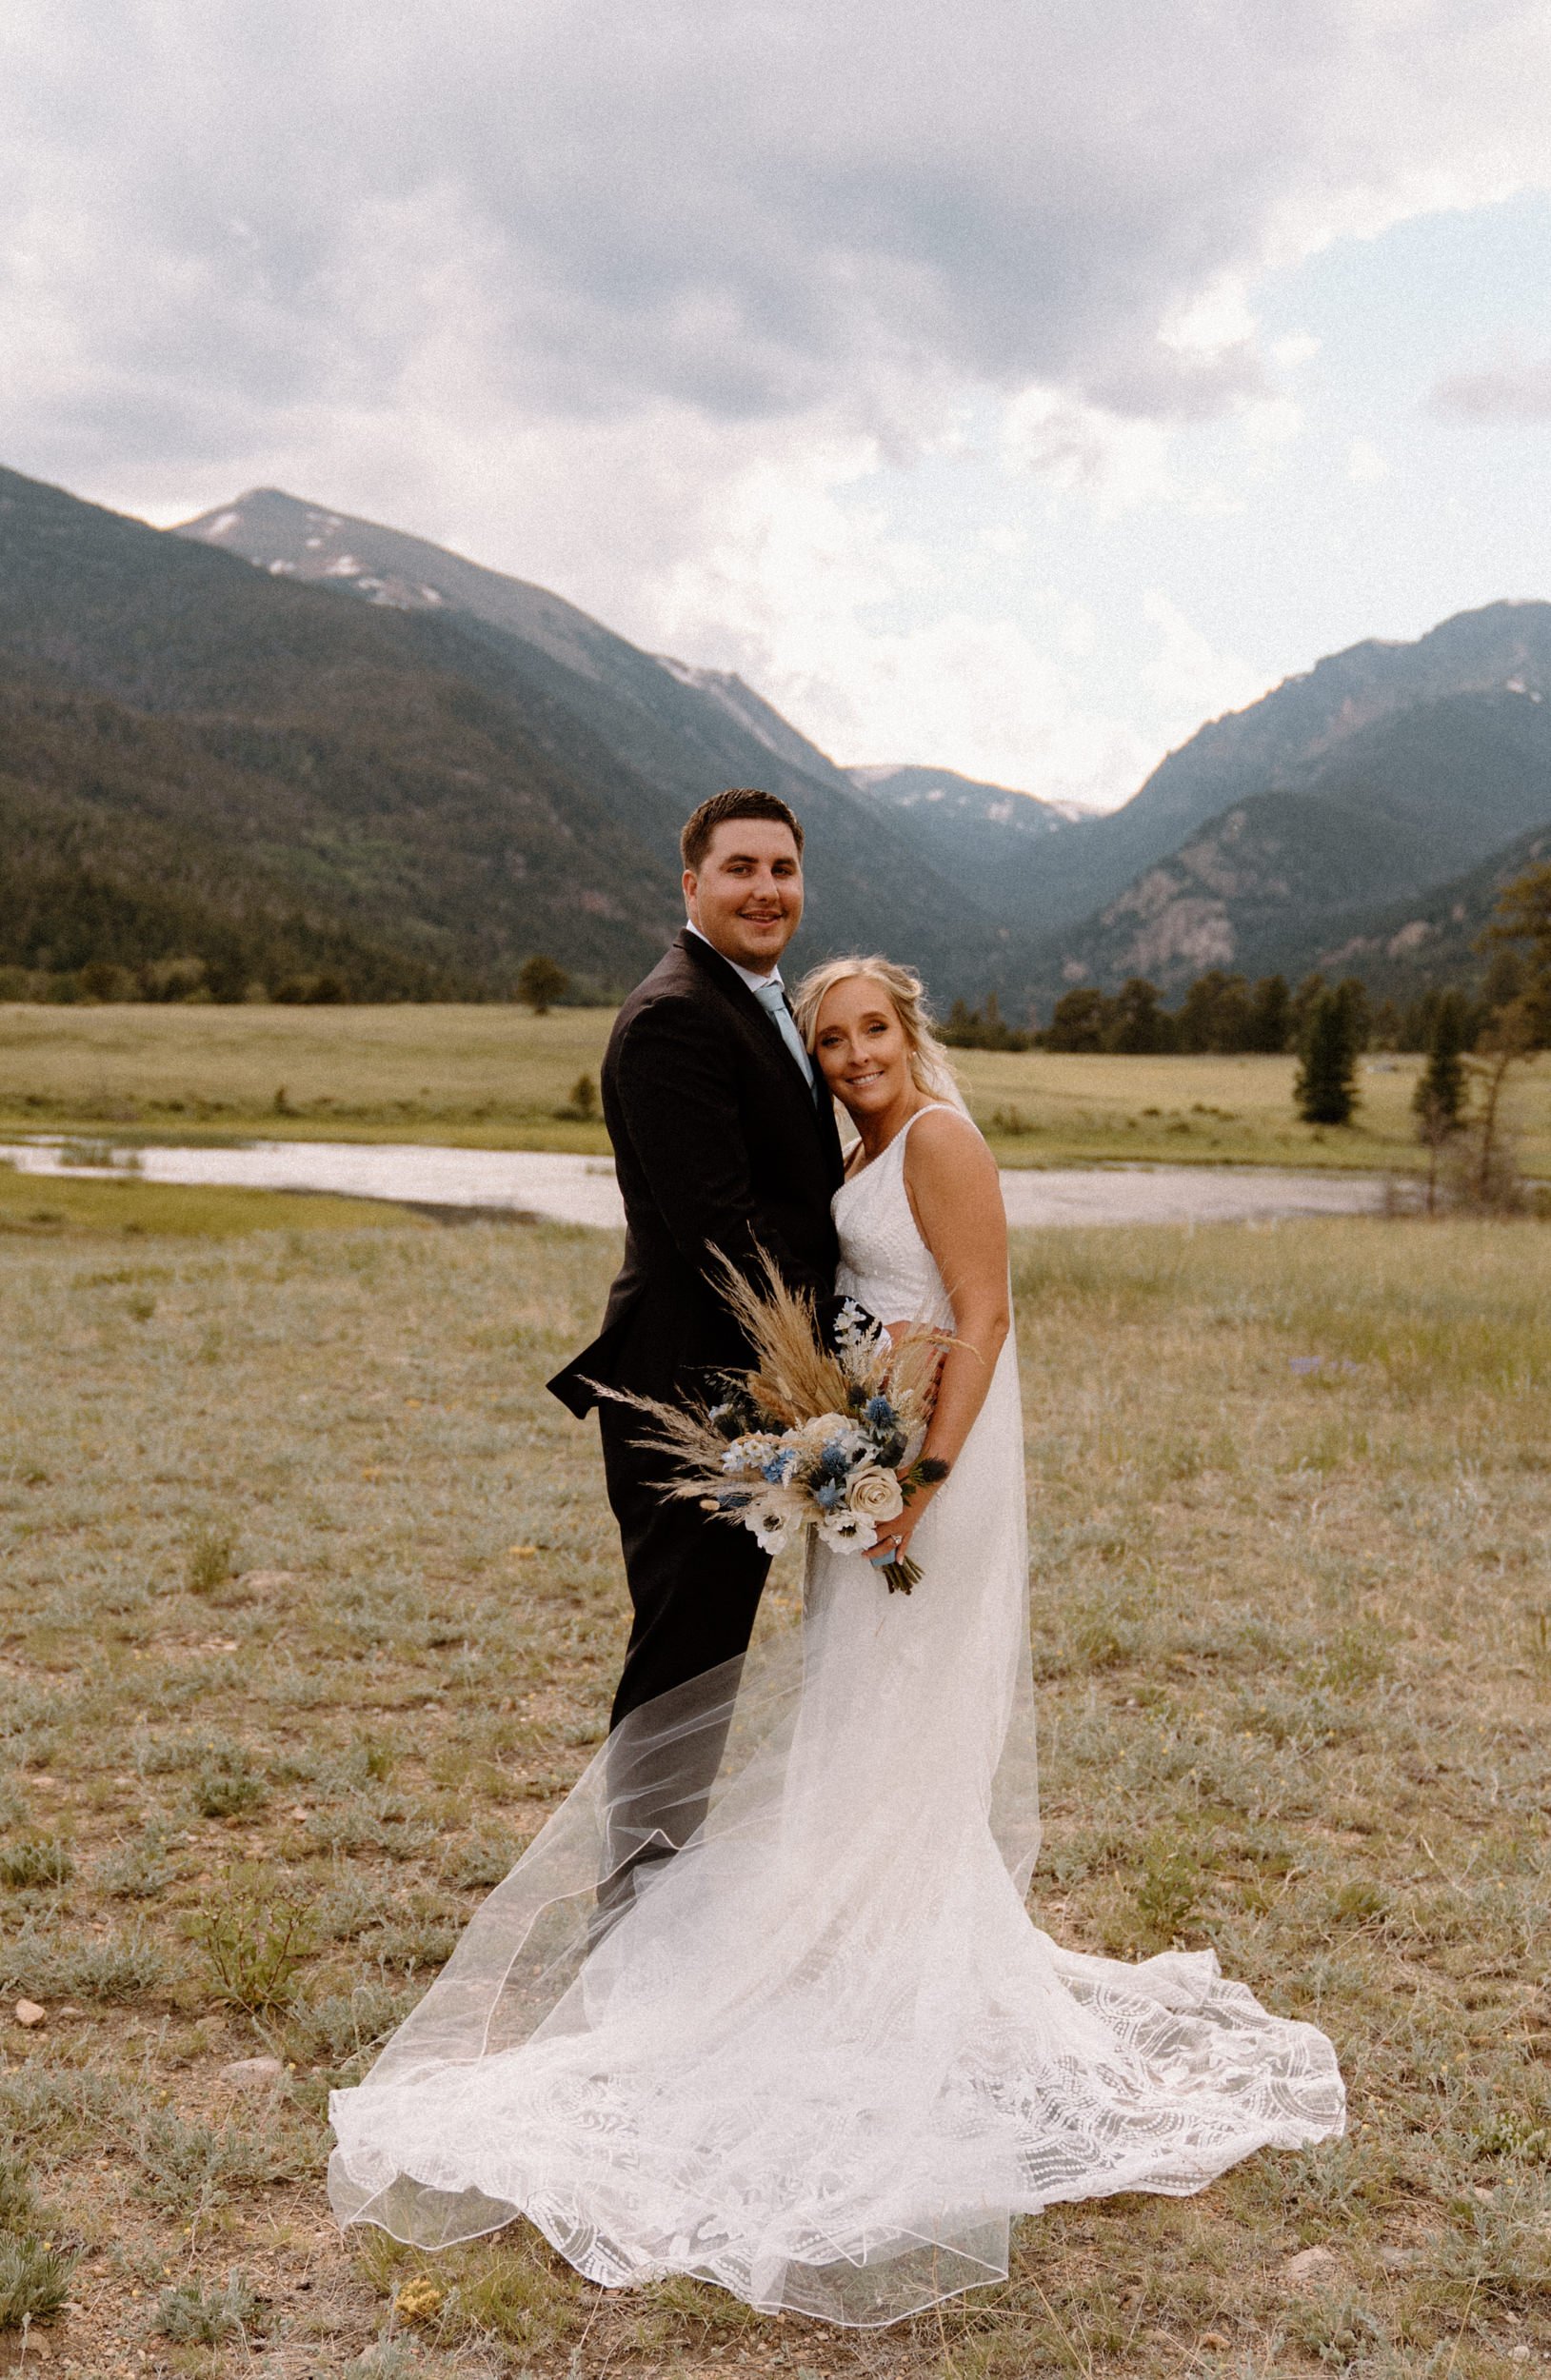 The bride and groom pose in front of the mountains in Estes Park, CO